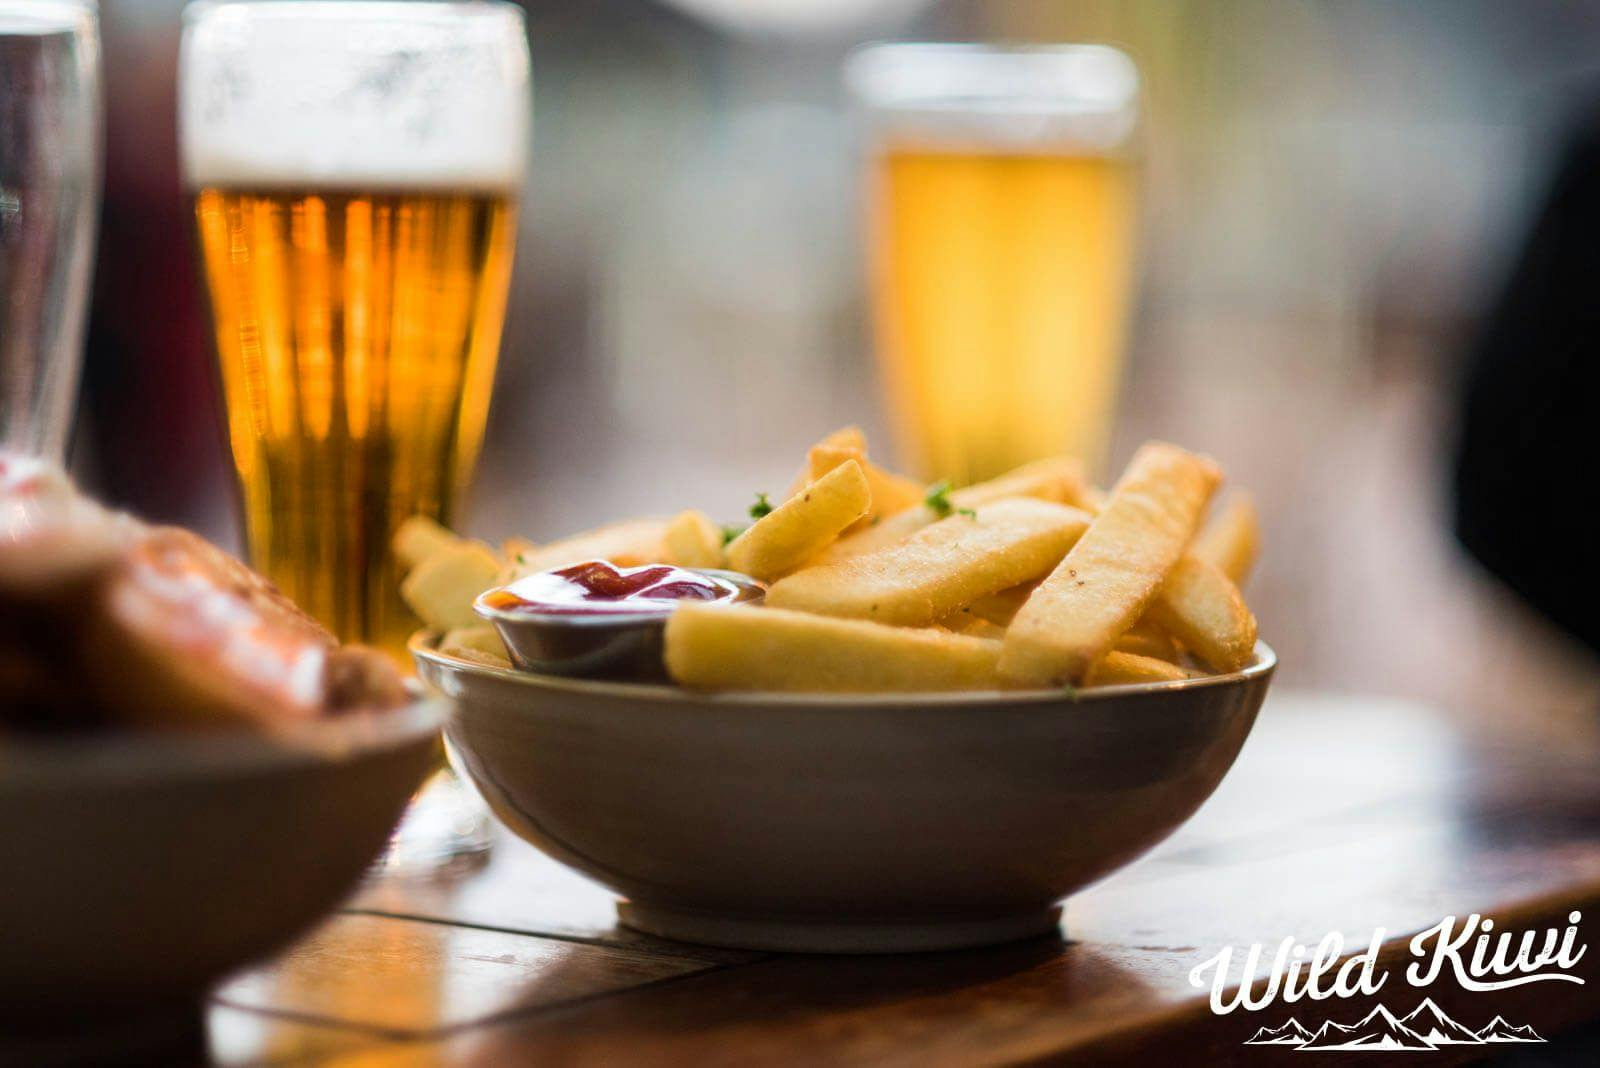 Eat and drink in New Zealand - Munch some wholesome grub